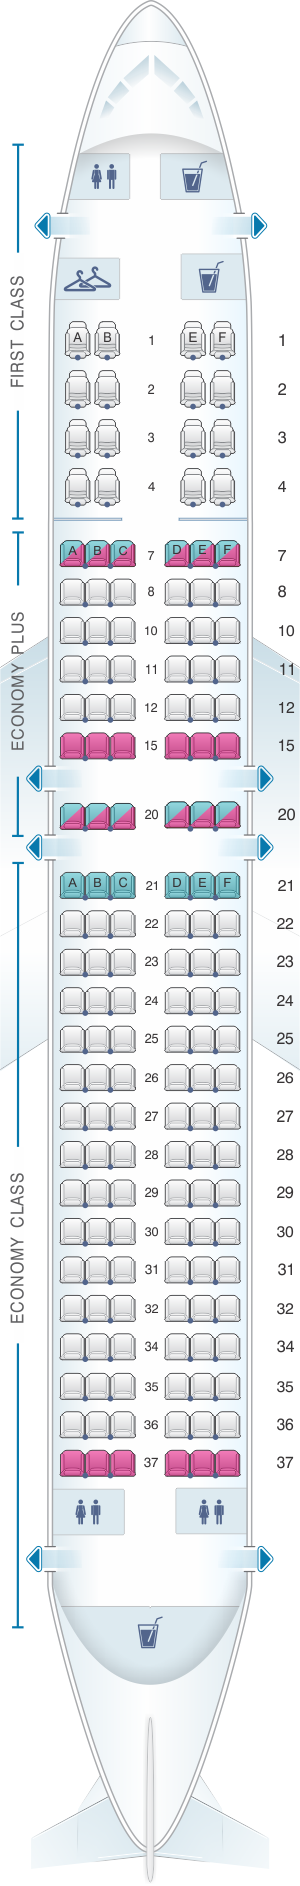 Seat map for United Airlines Boeing B737 MAX 8